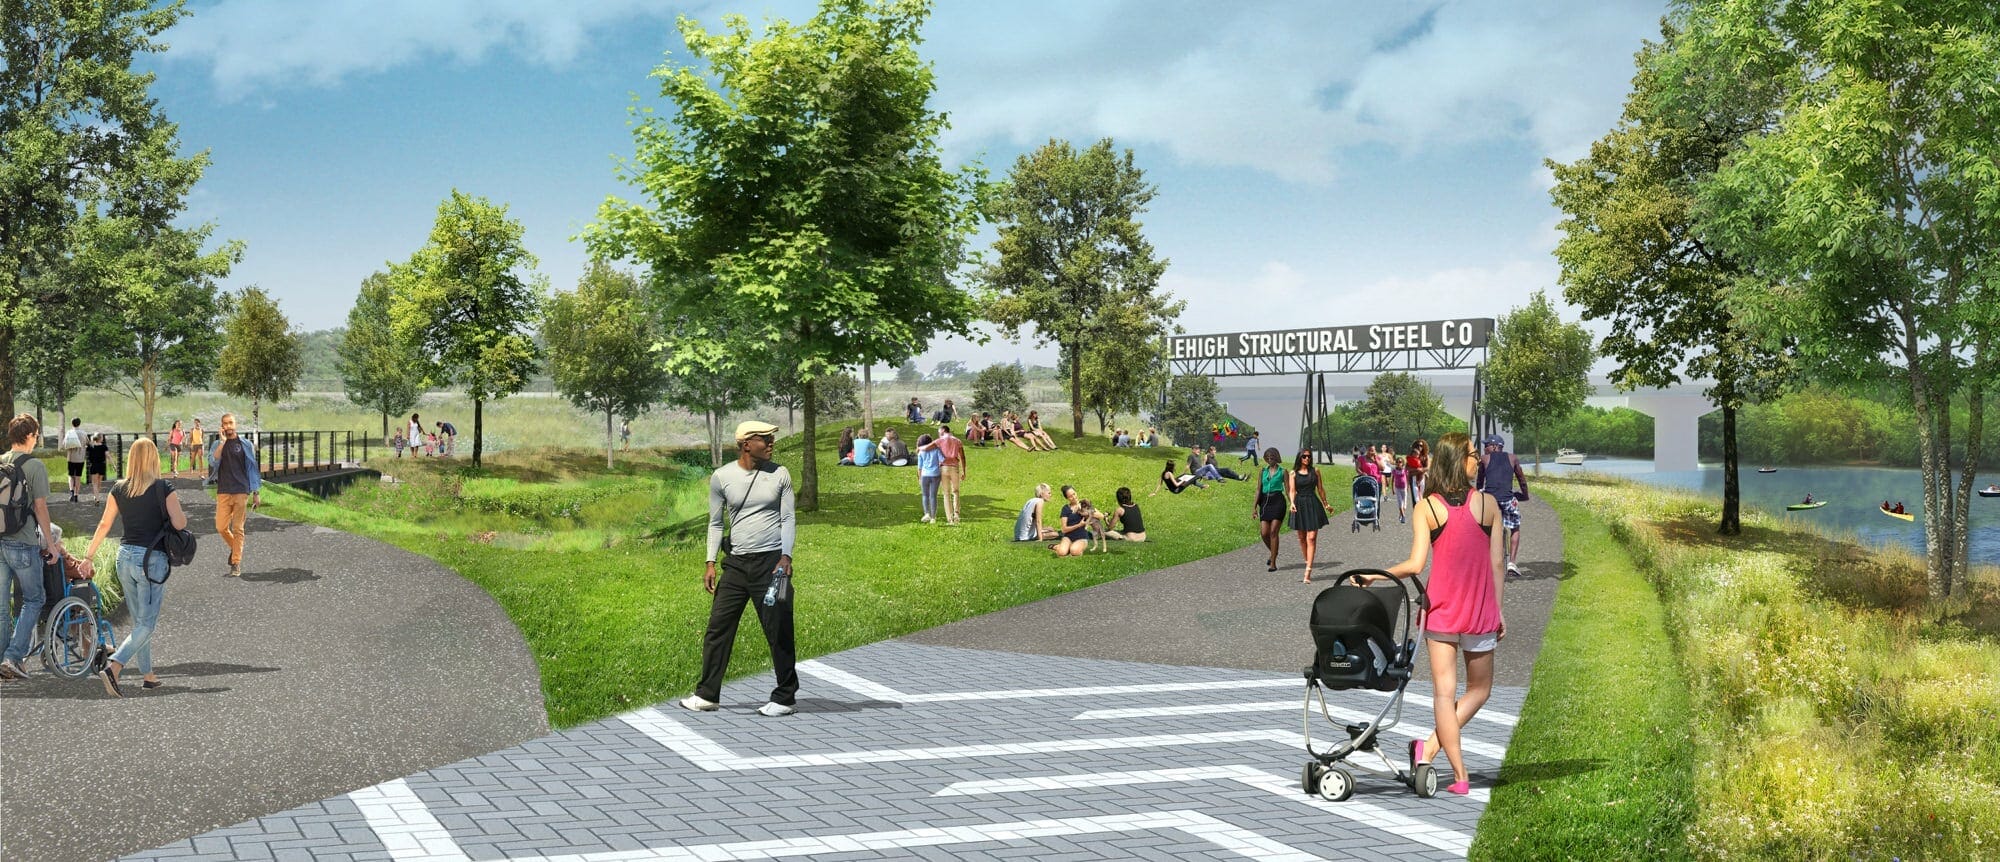 New Road Through Allentown’s Waterfront Will Fill Gap in D&L Trail